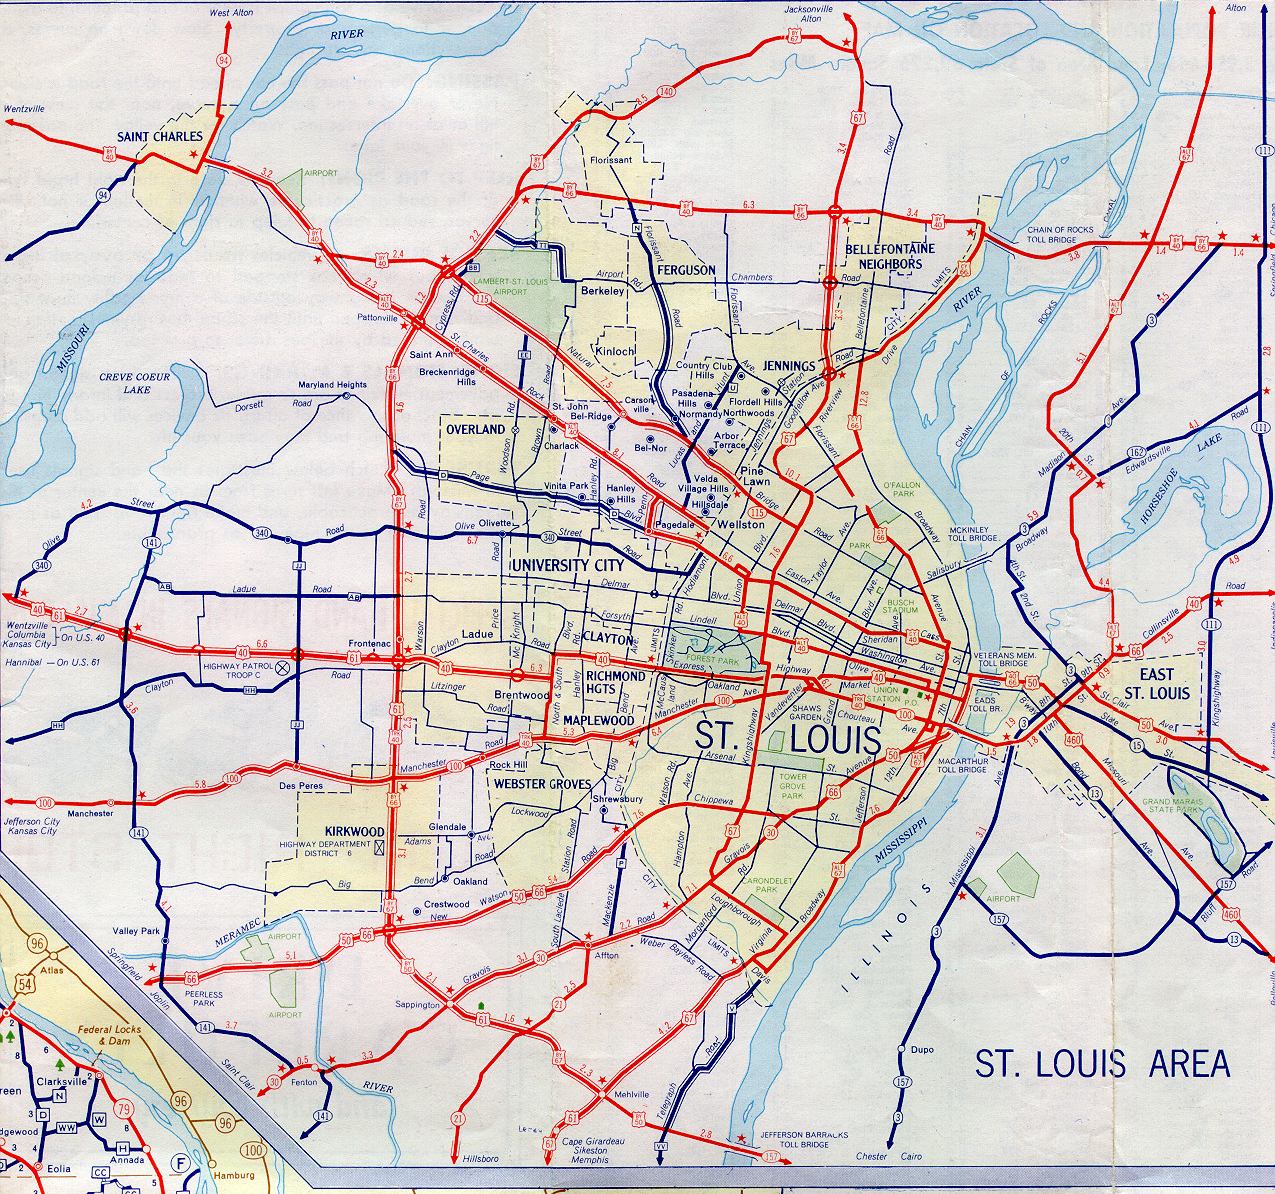 Inset map for St. Louis, Mo. (1957)